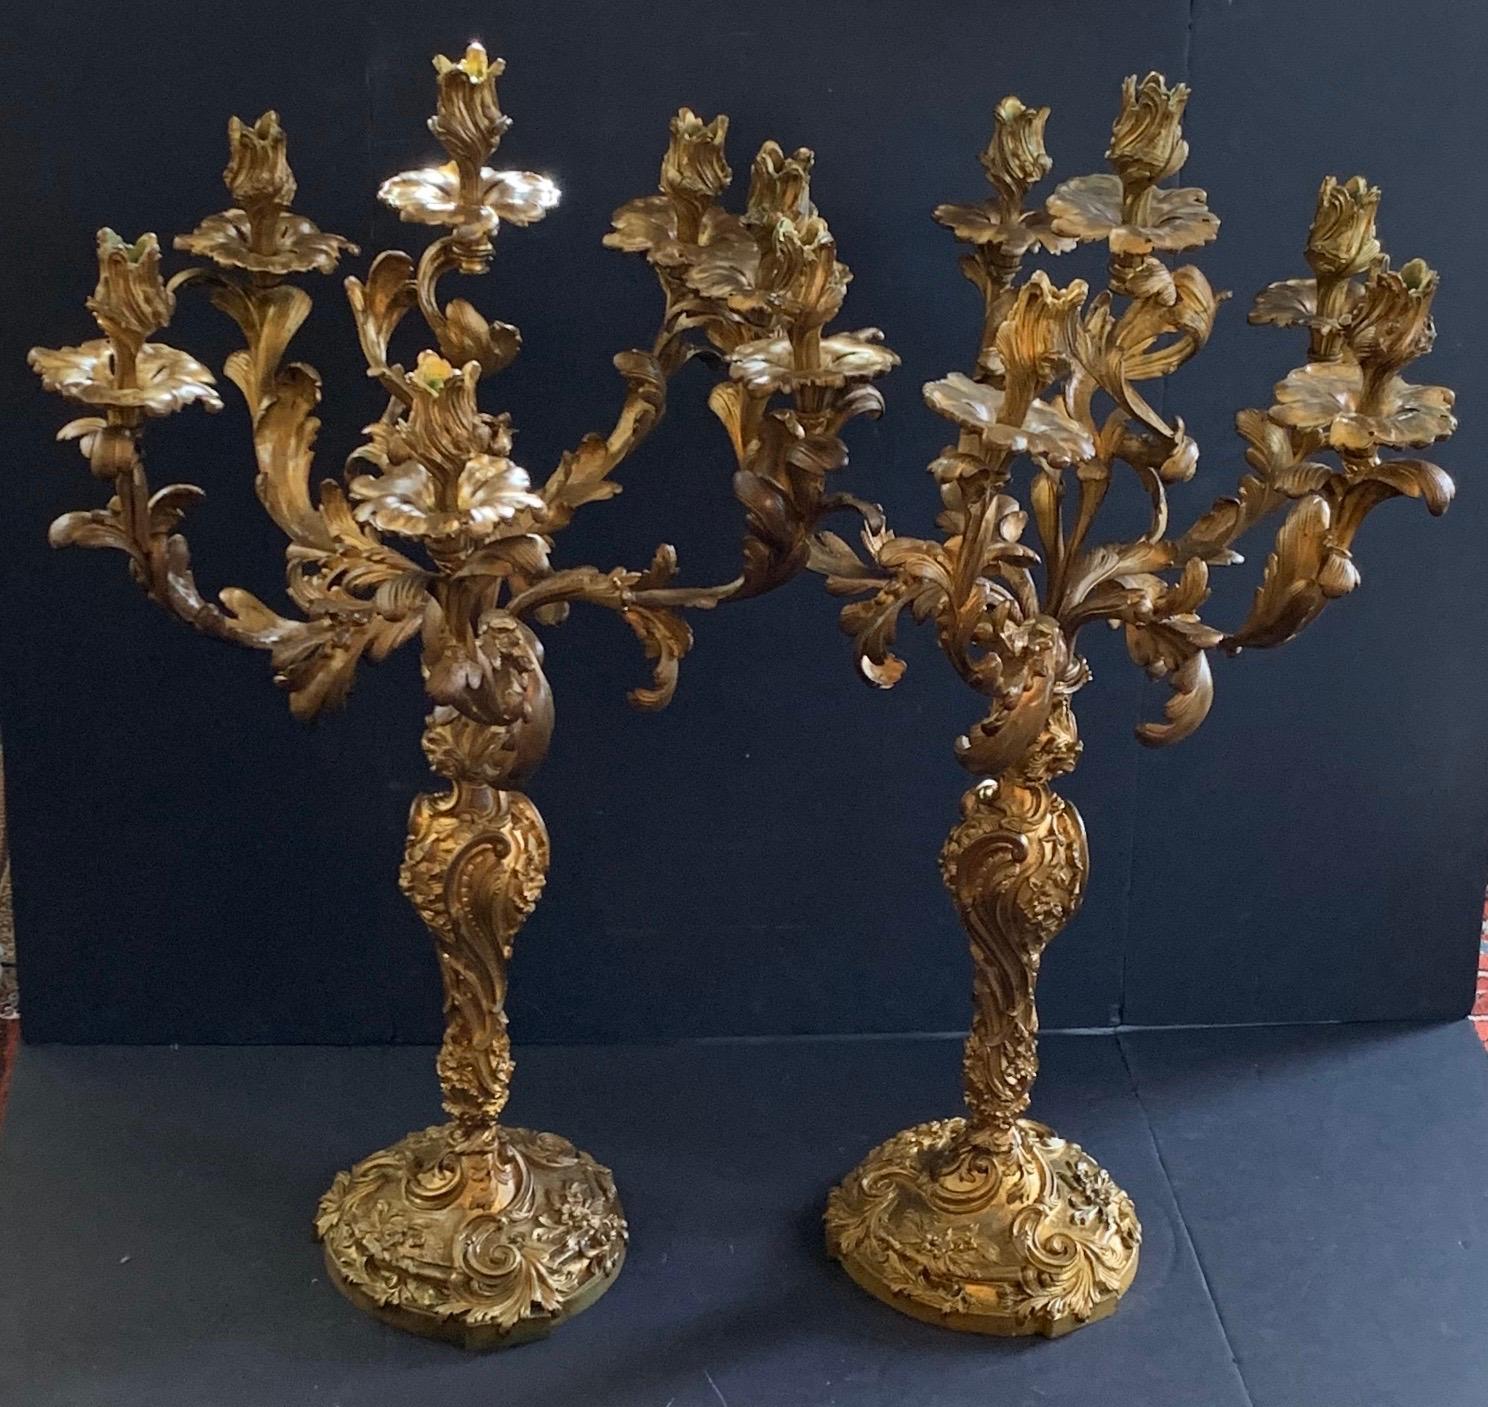 A monumental pair of French Rococo finely chased doré bronze six scrolling acanthus leaves candelabras
Antique late 19th century, very impressive in size and exceptionally heavy.
Measures: Height 36